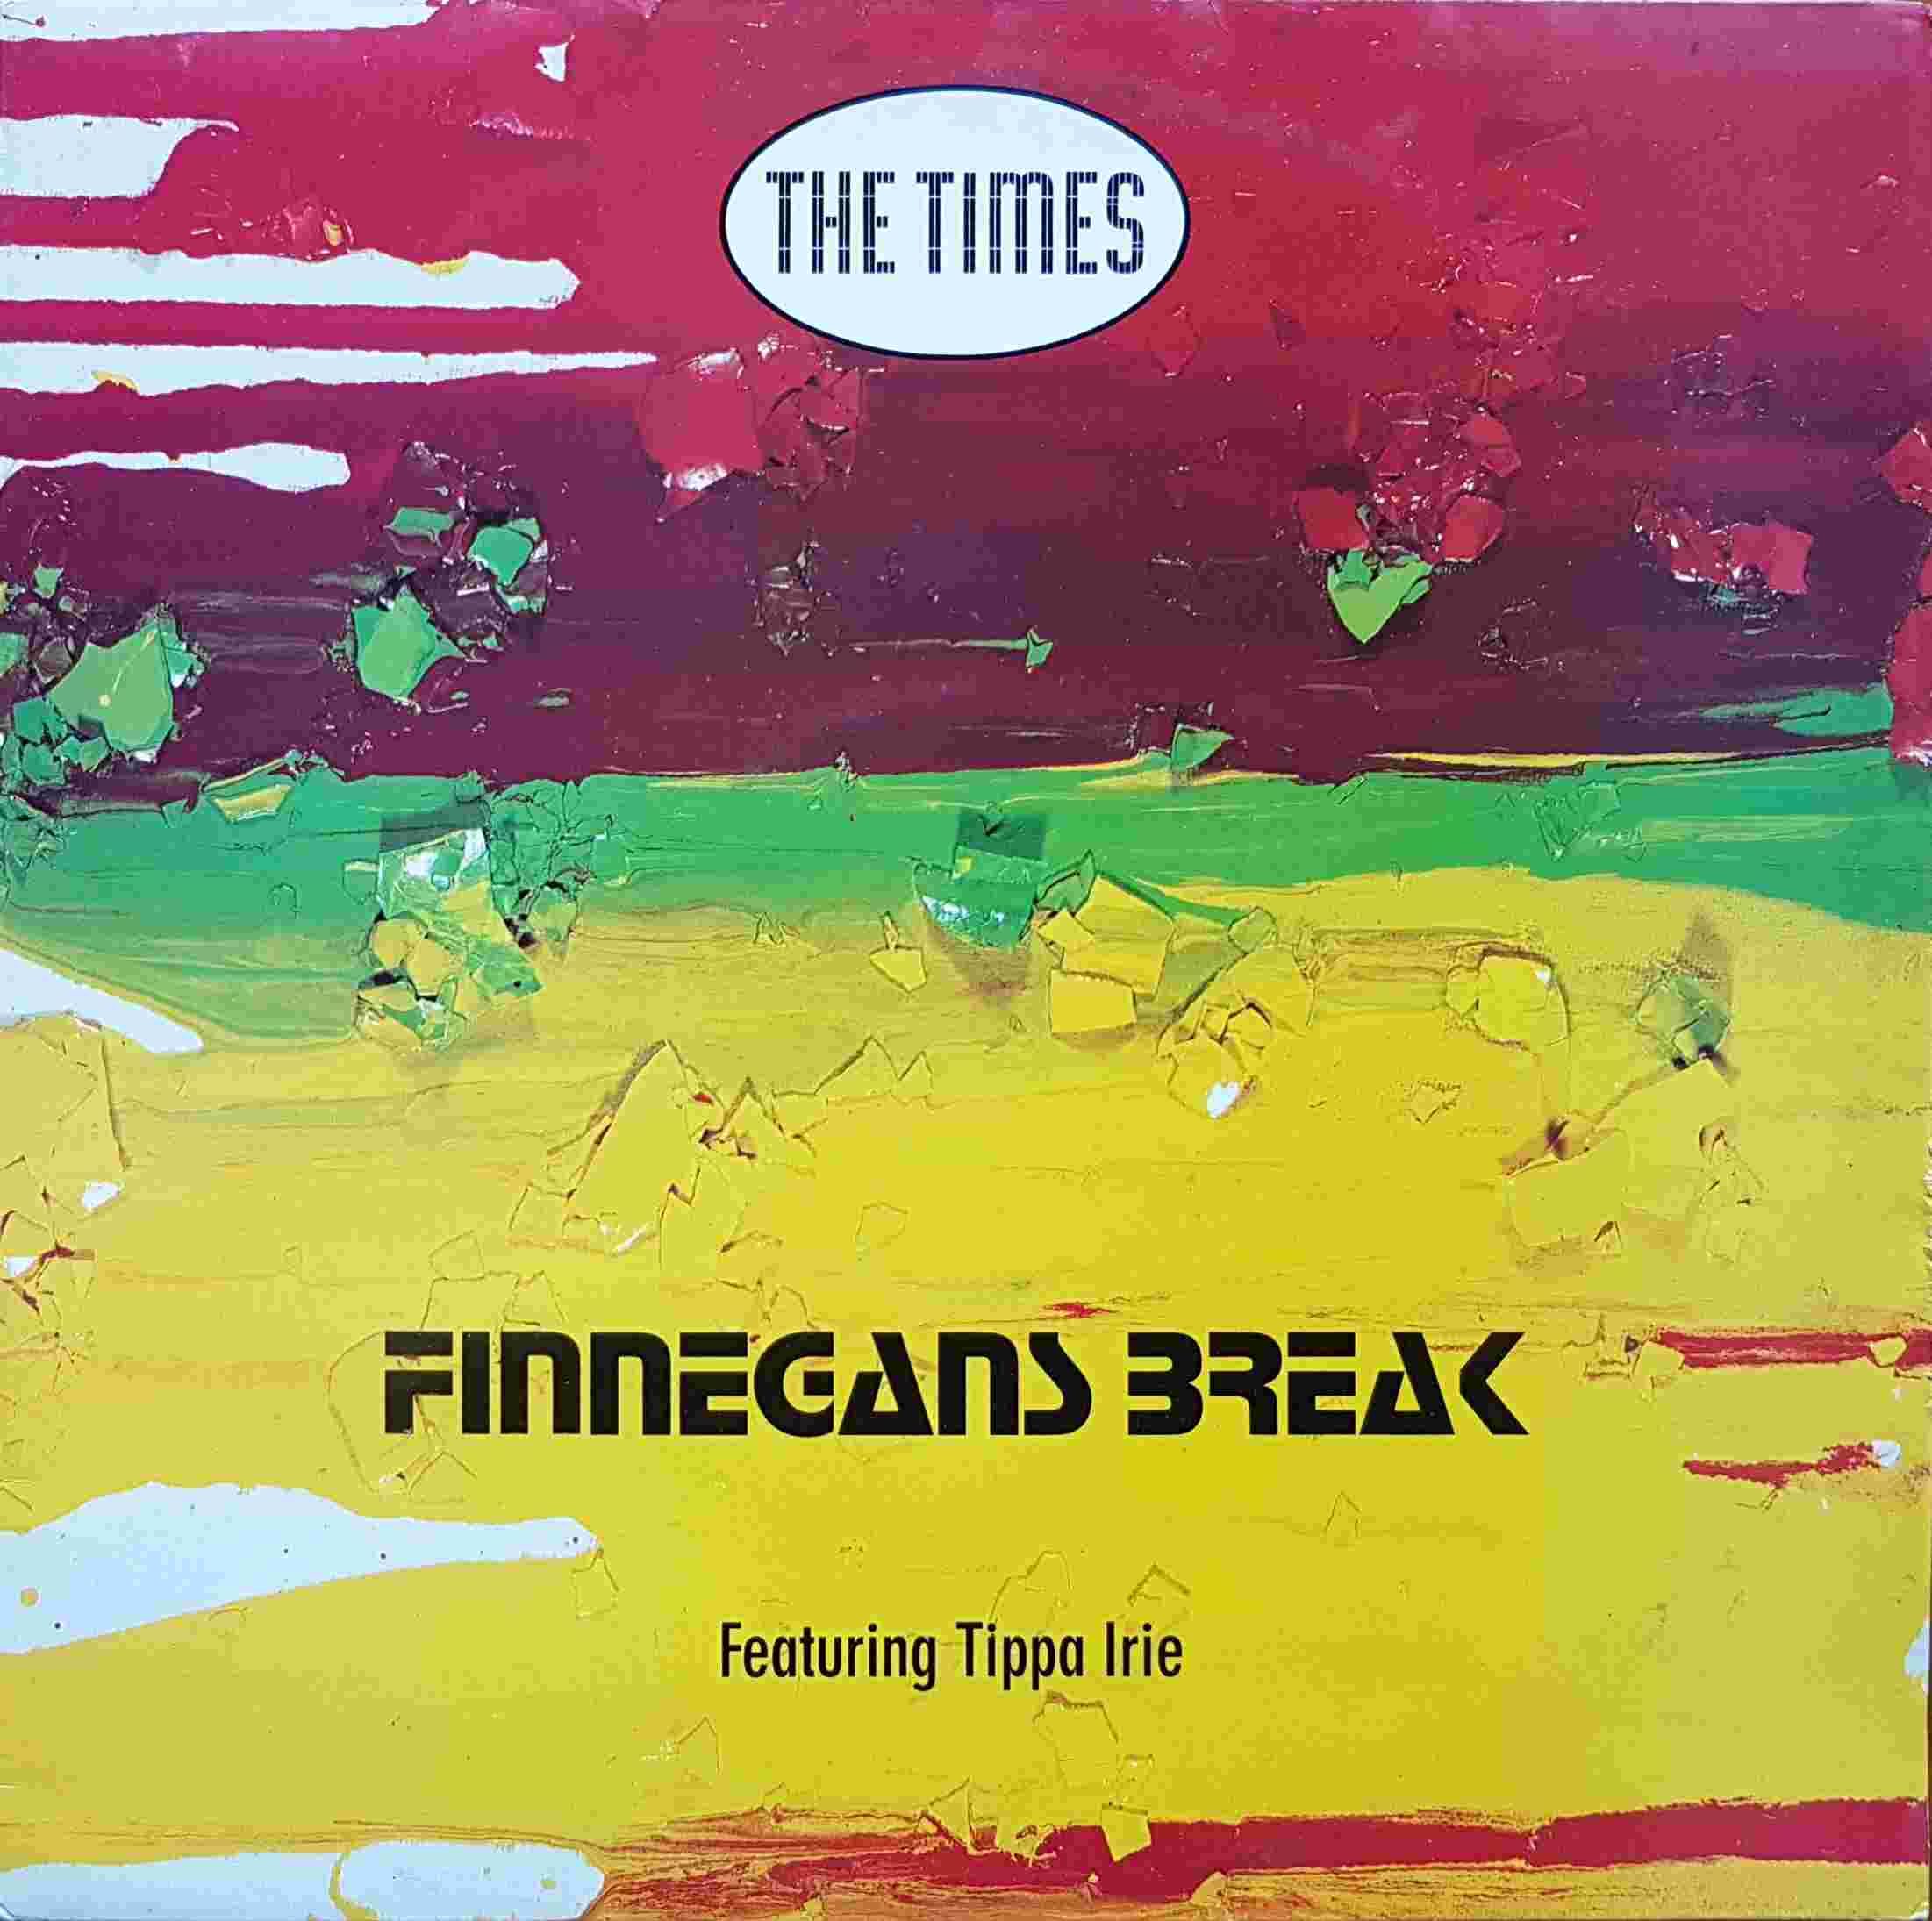 Picture of CRE 158 T Finnegans break by artist Ball / Henry / The Times 